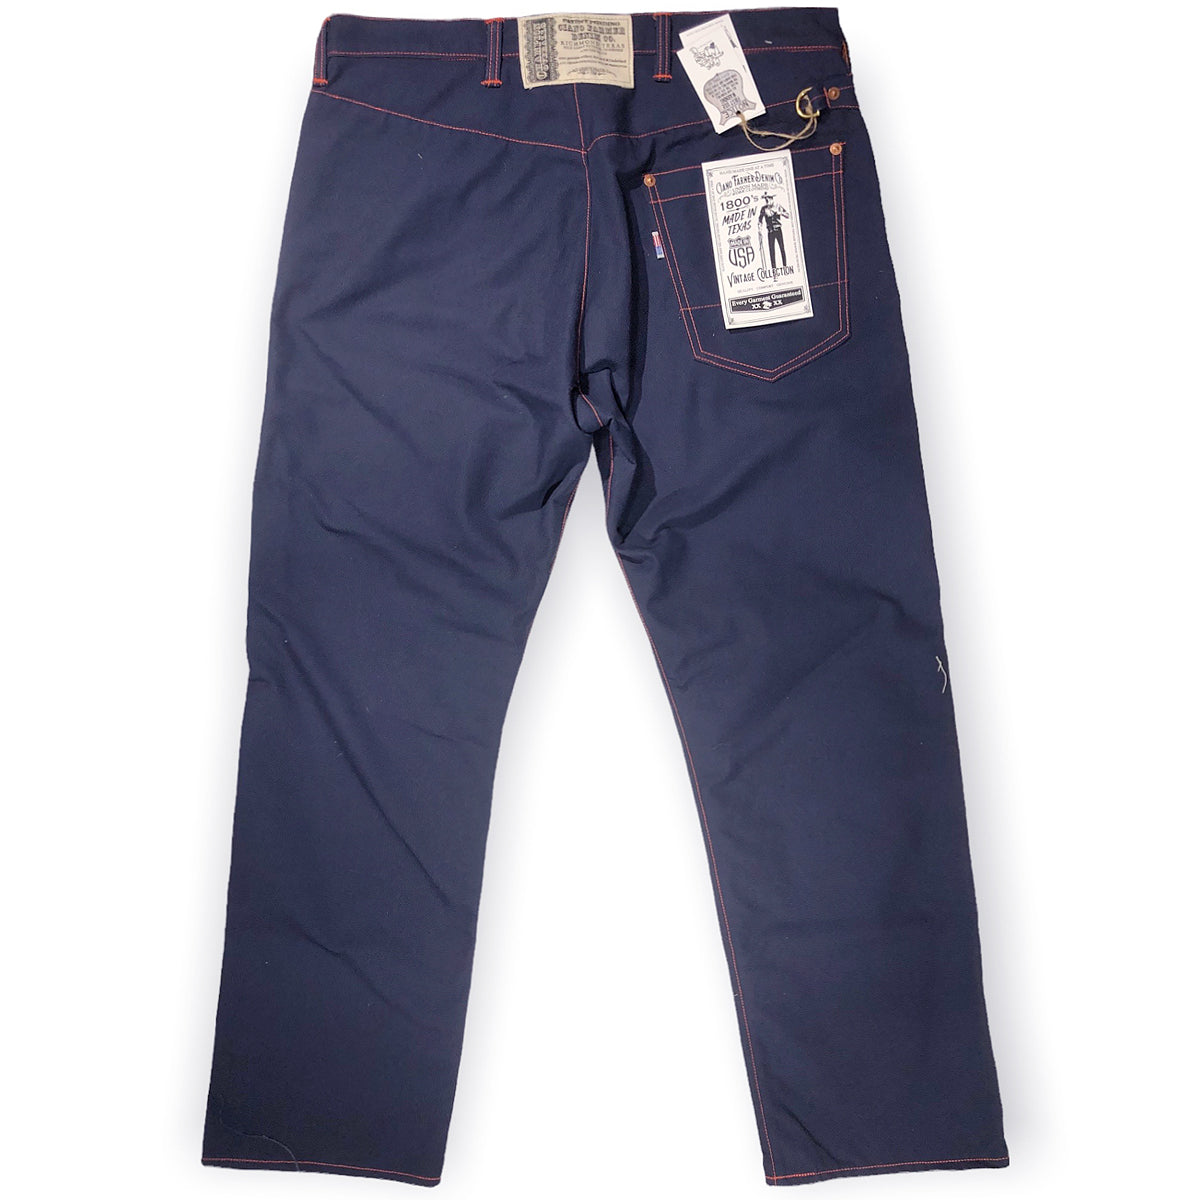 OPSTK 12oz Navy Duck 1873 Modify Dungarees 40W 35L 997 Miner Fit